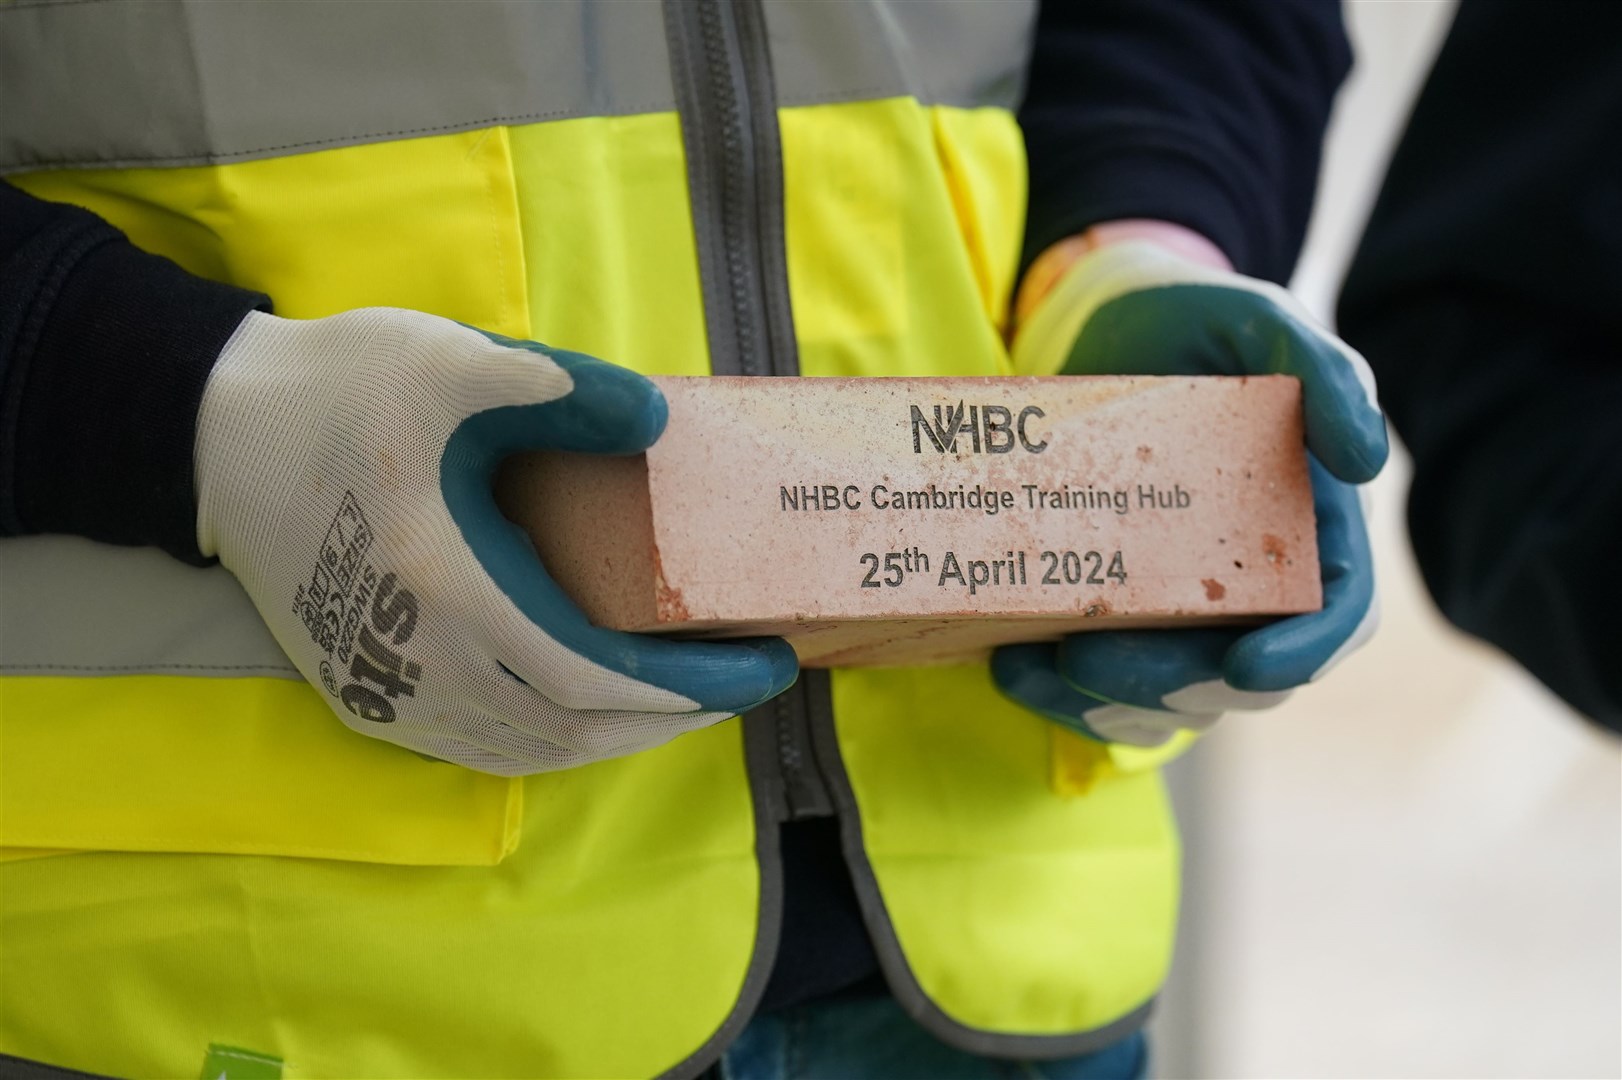 Anne was presented with a commemorative brick after she officially opened the bricklaying training hub (Joe Giddens/ PA)